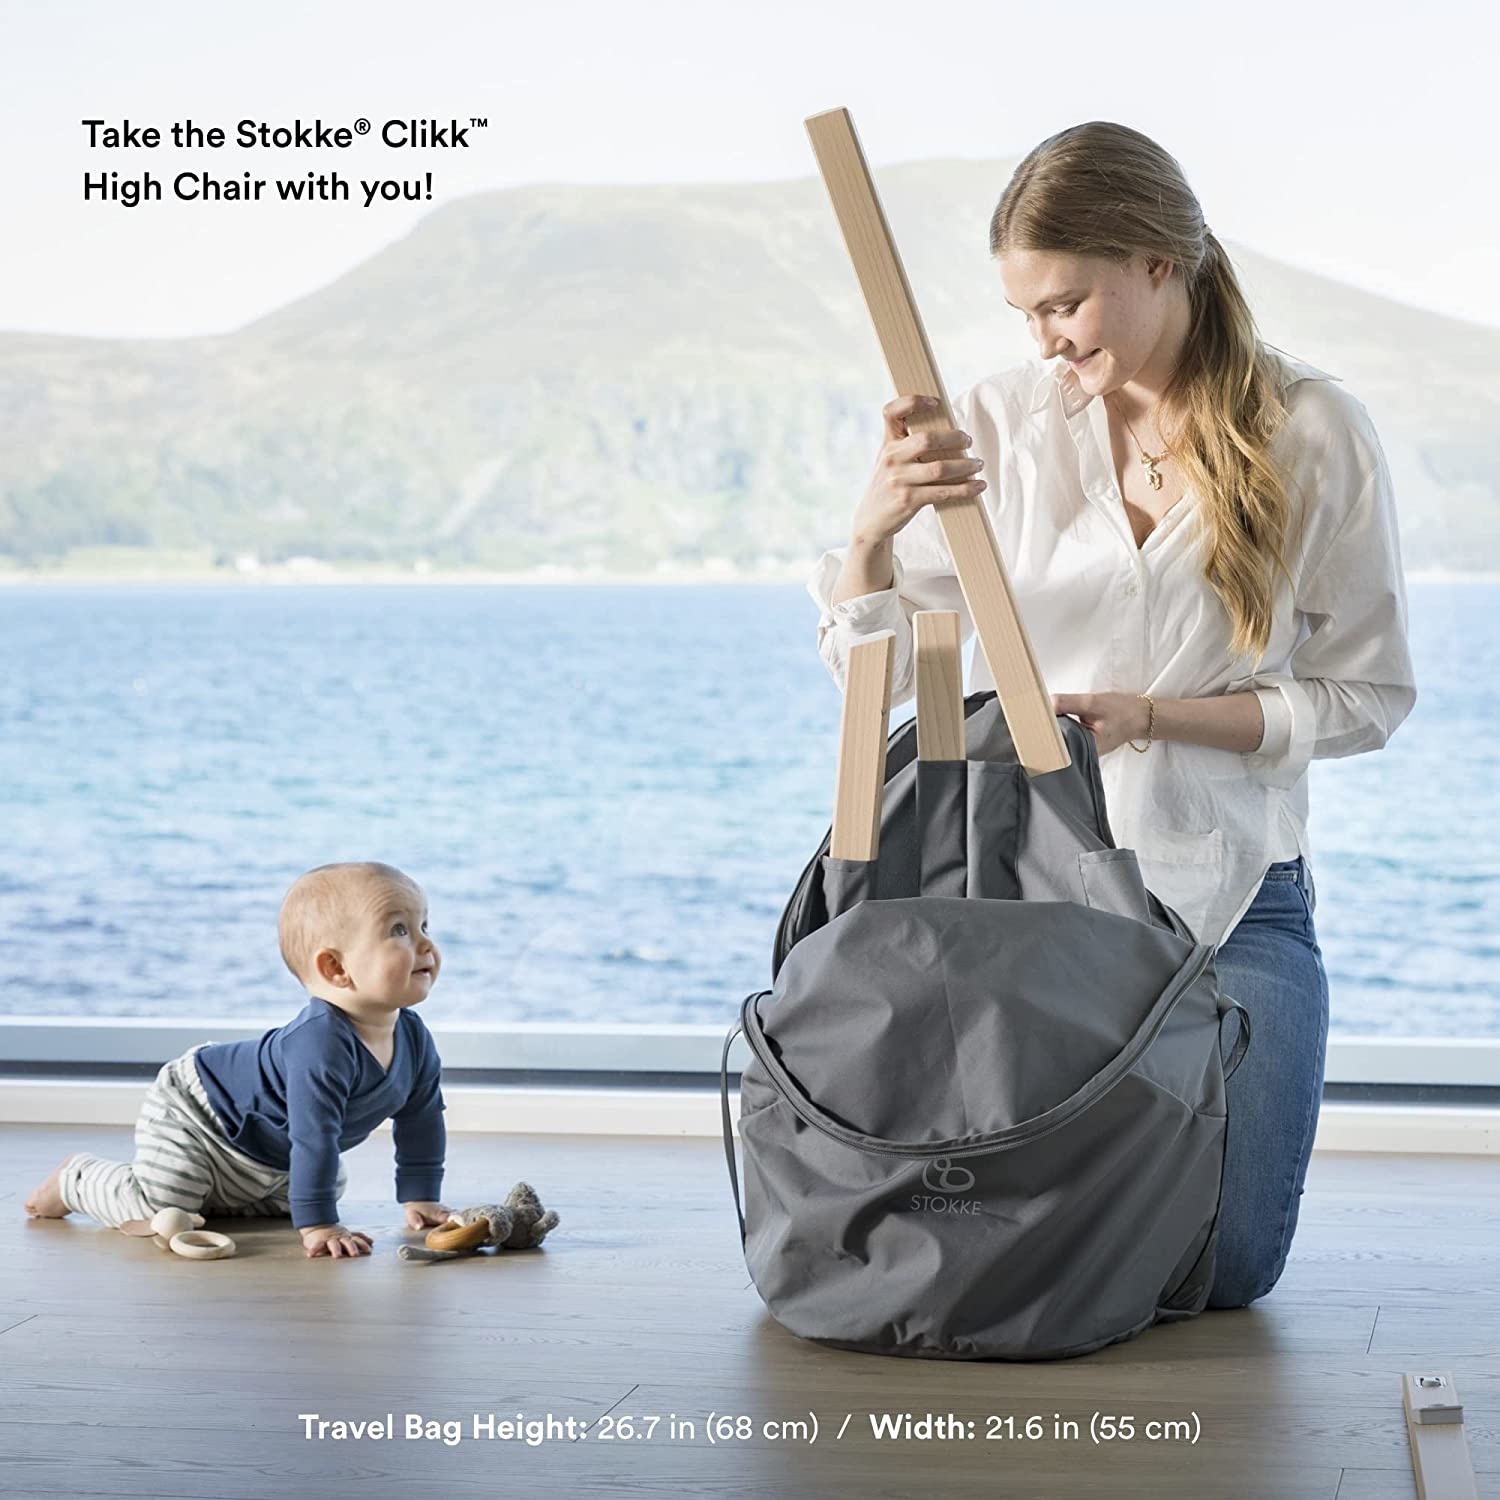 Stokke Stokke White Clikk High Chair with Grey Sprinkle Cushion and Travel Bag Bundle (in store exclusive)